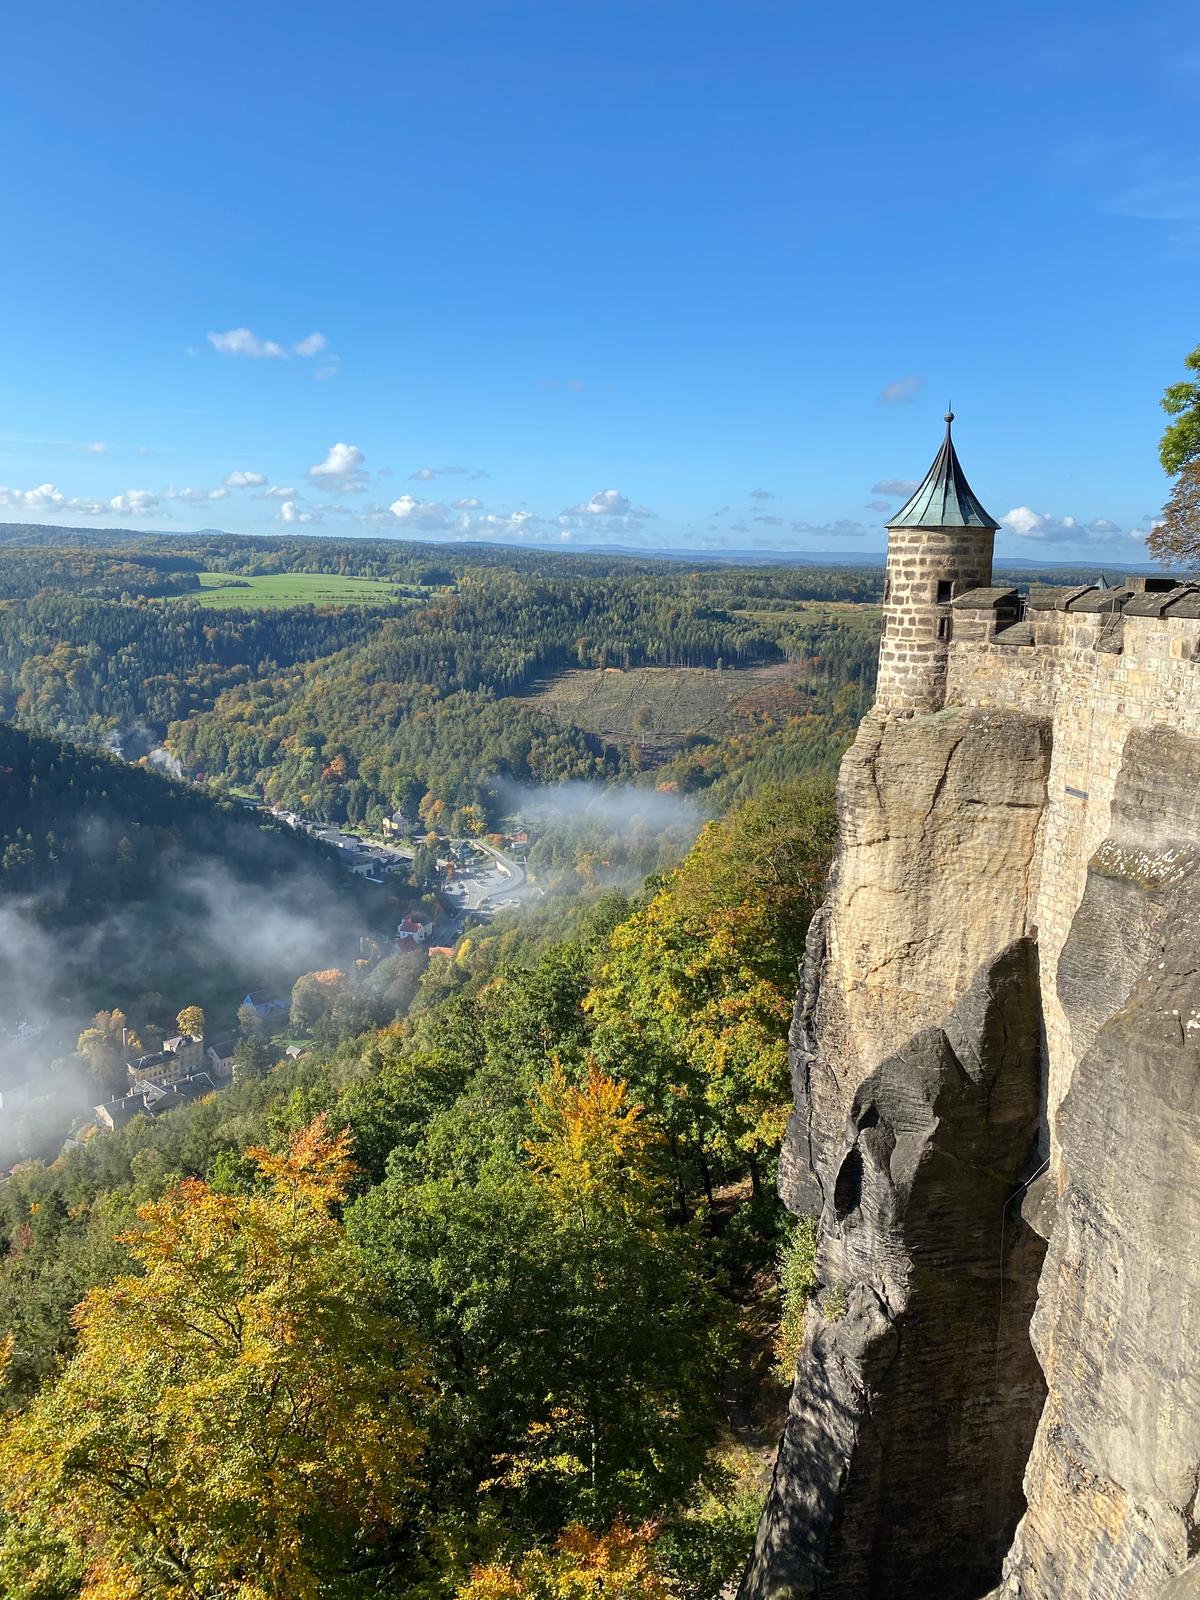 Königstein Fortress overlooking the town of Königstein on the left bank of the River Elbe, near Dresden, Germany. (Tim Johnson)